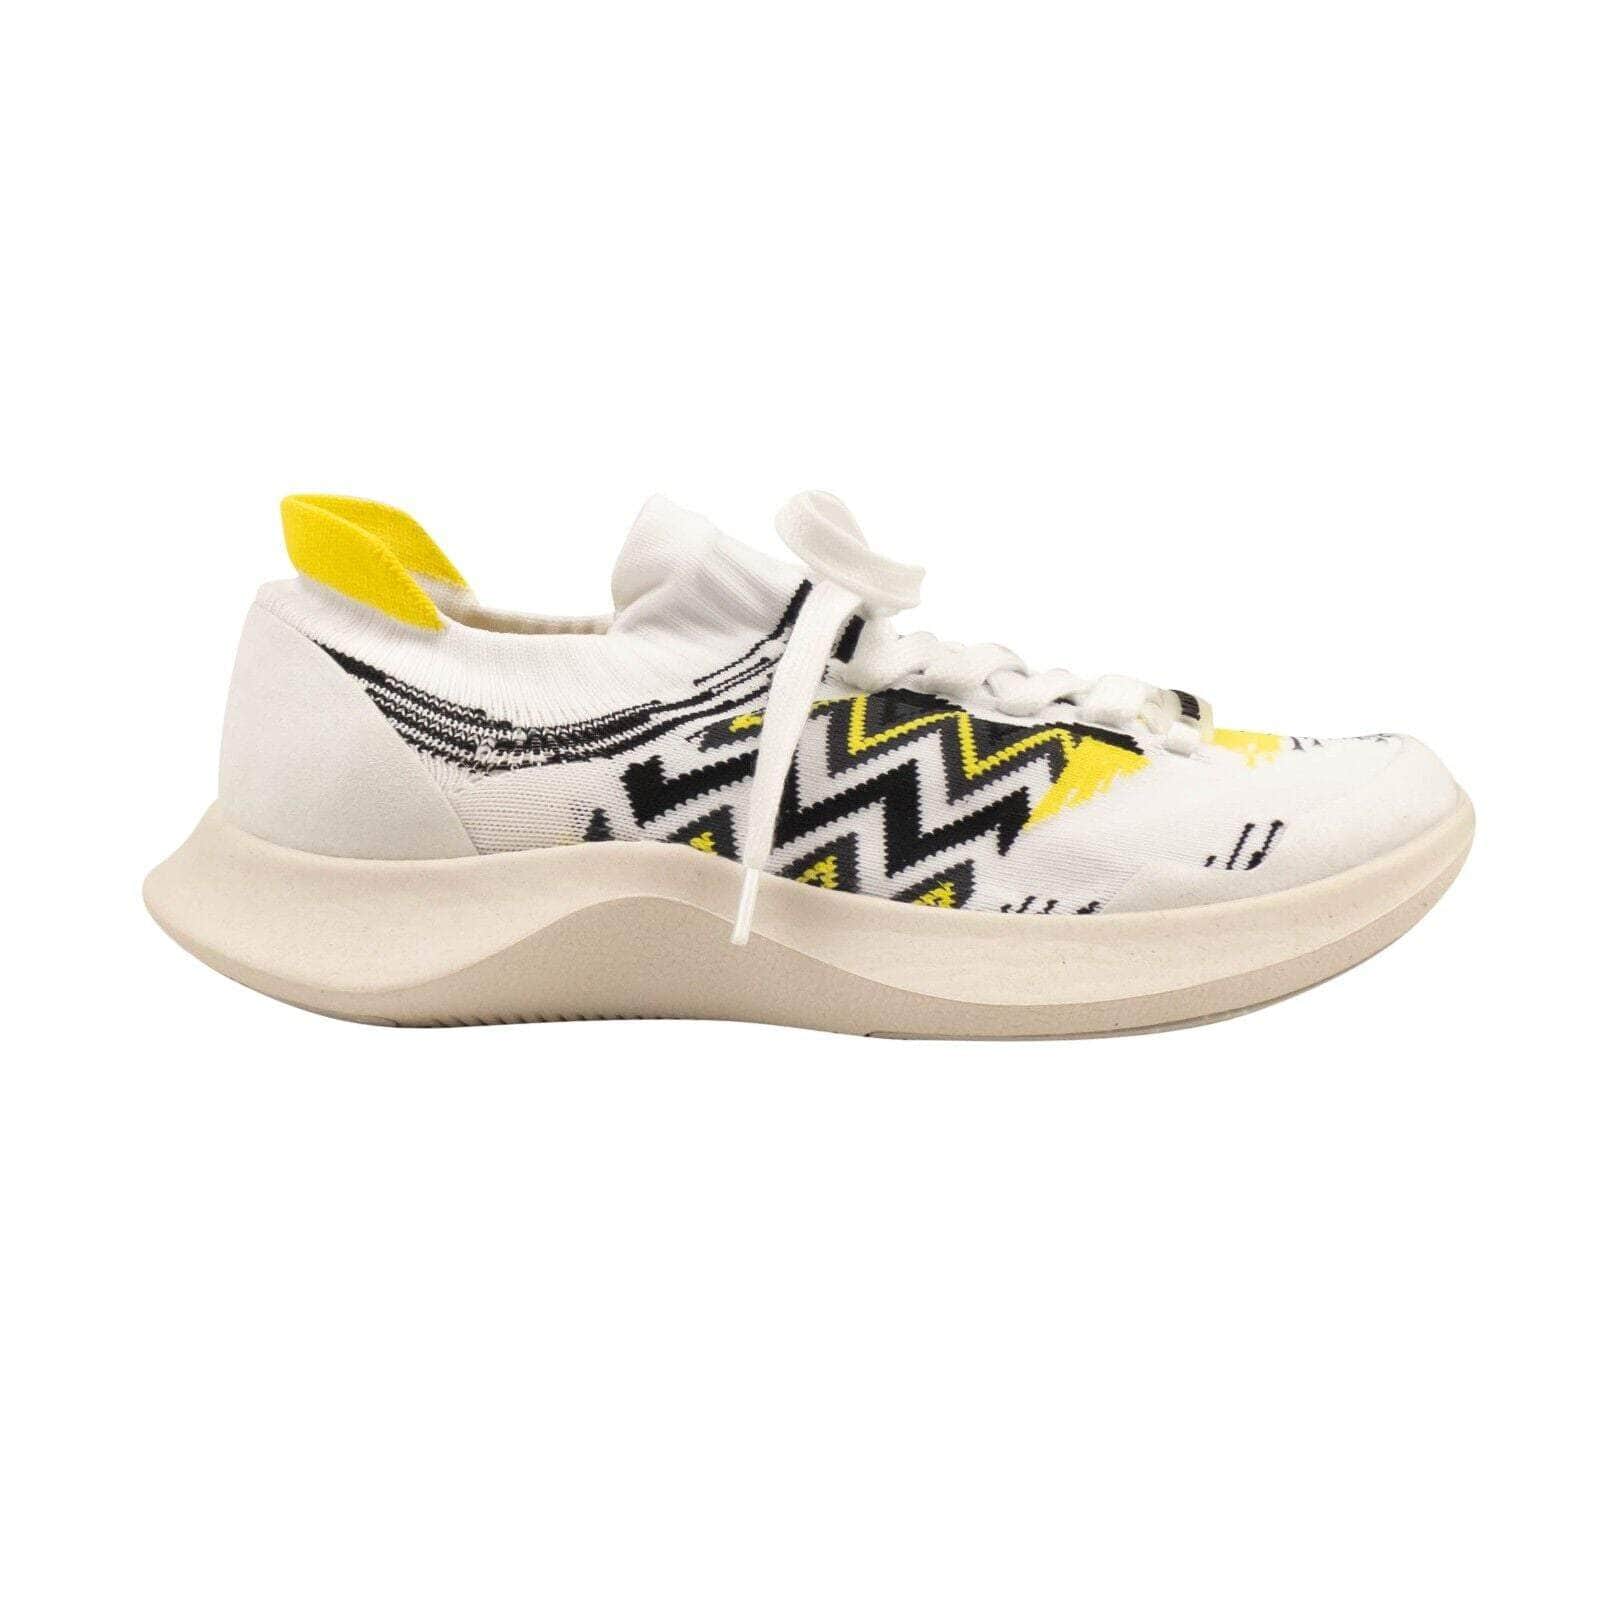 MISSONI 250-500, channelenable-all, chicmi, couponcollection, gender-womens, main-shoes, missoni, size-36, size-37, size-38, size-39 White And Black ACBC Fly Knit Chevron Low Top Sneakers